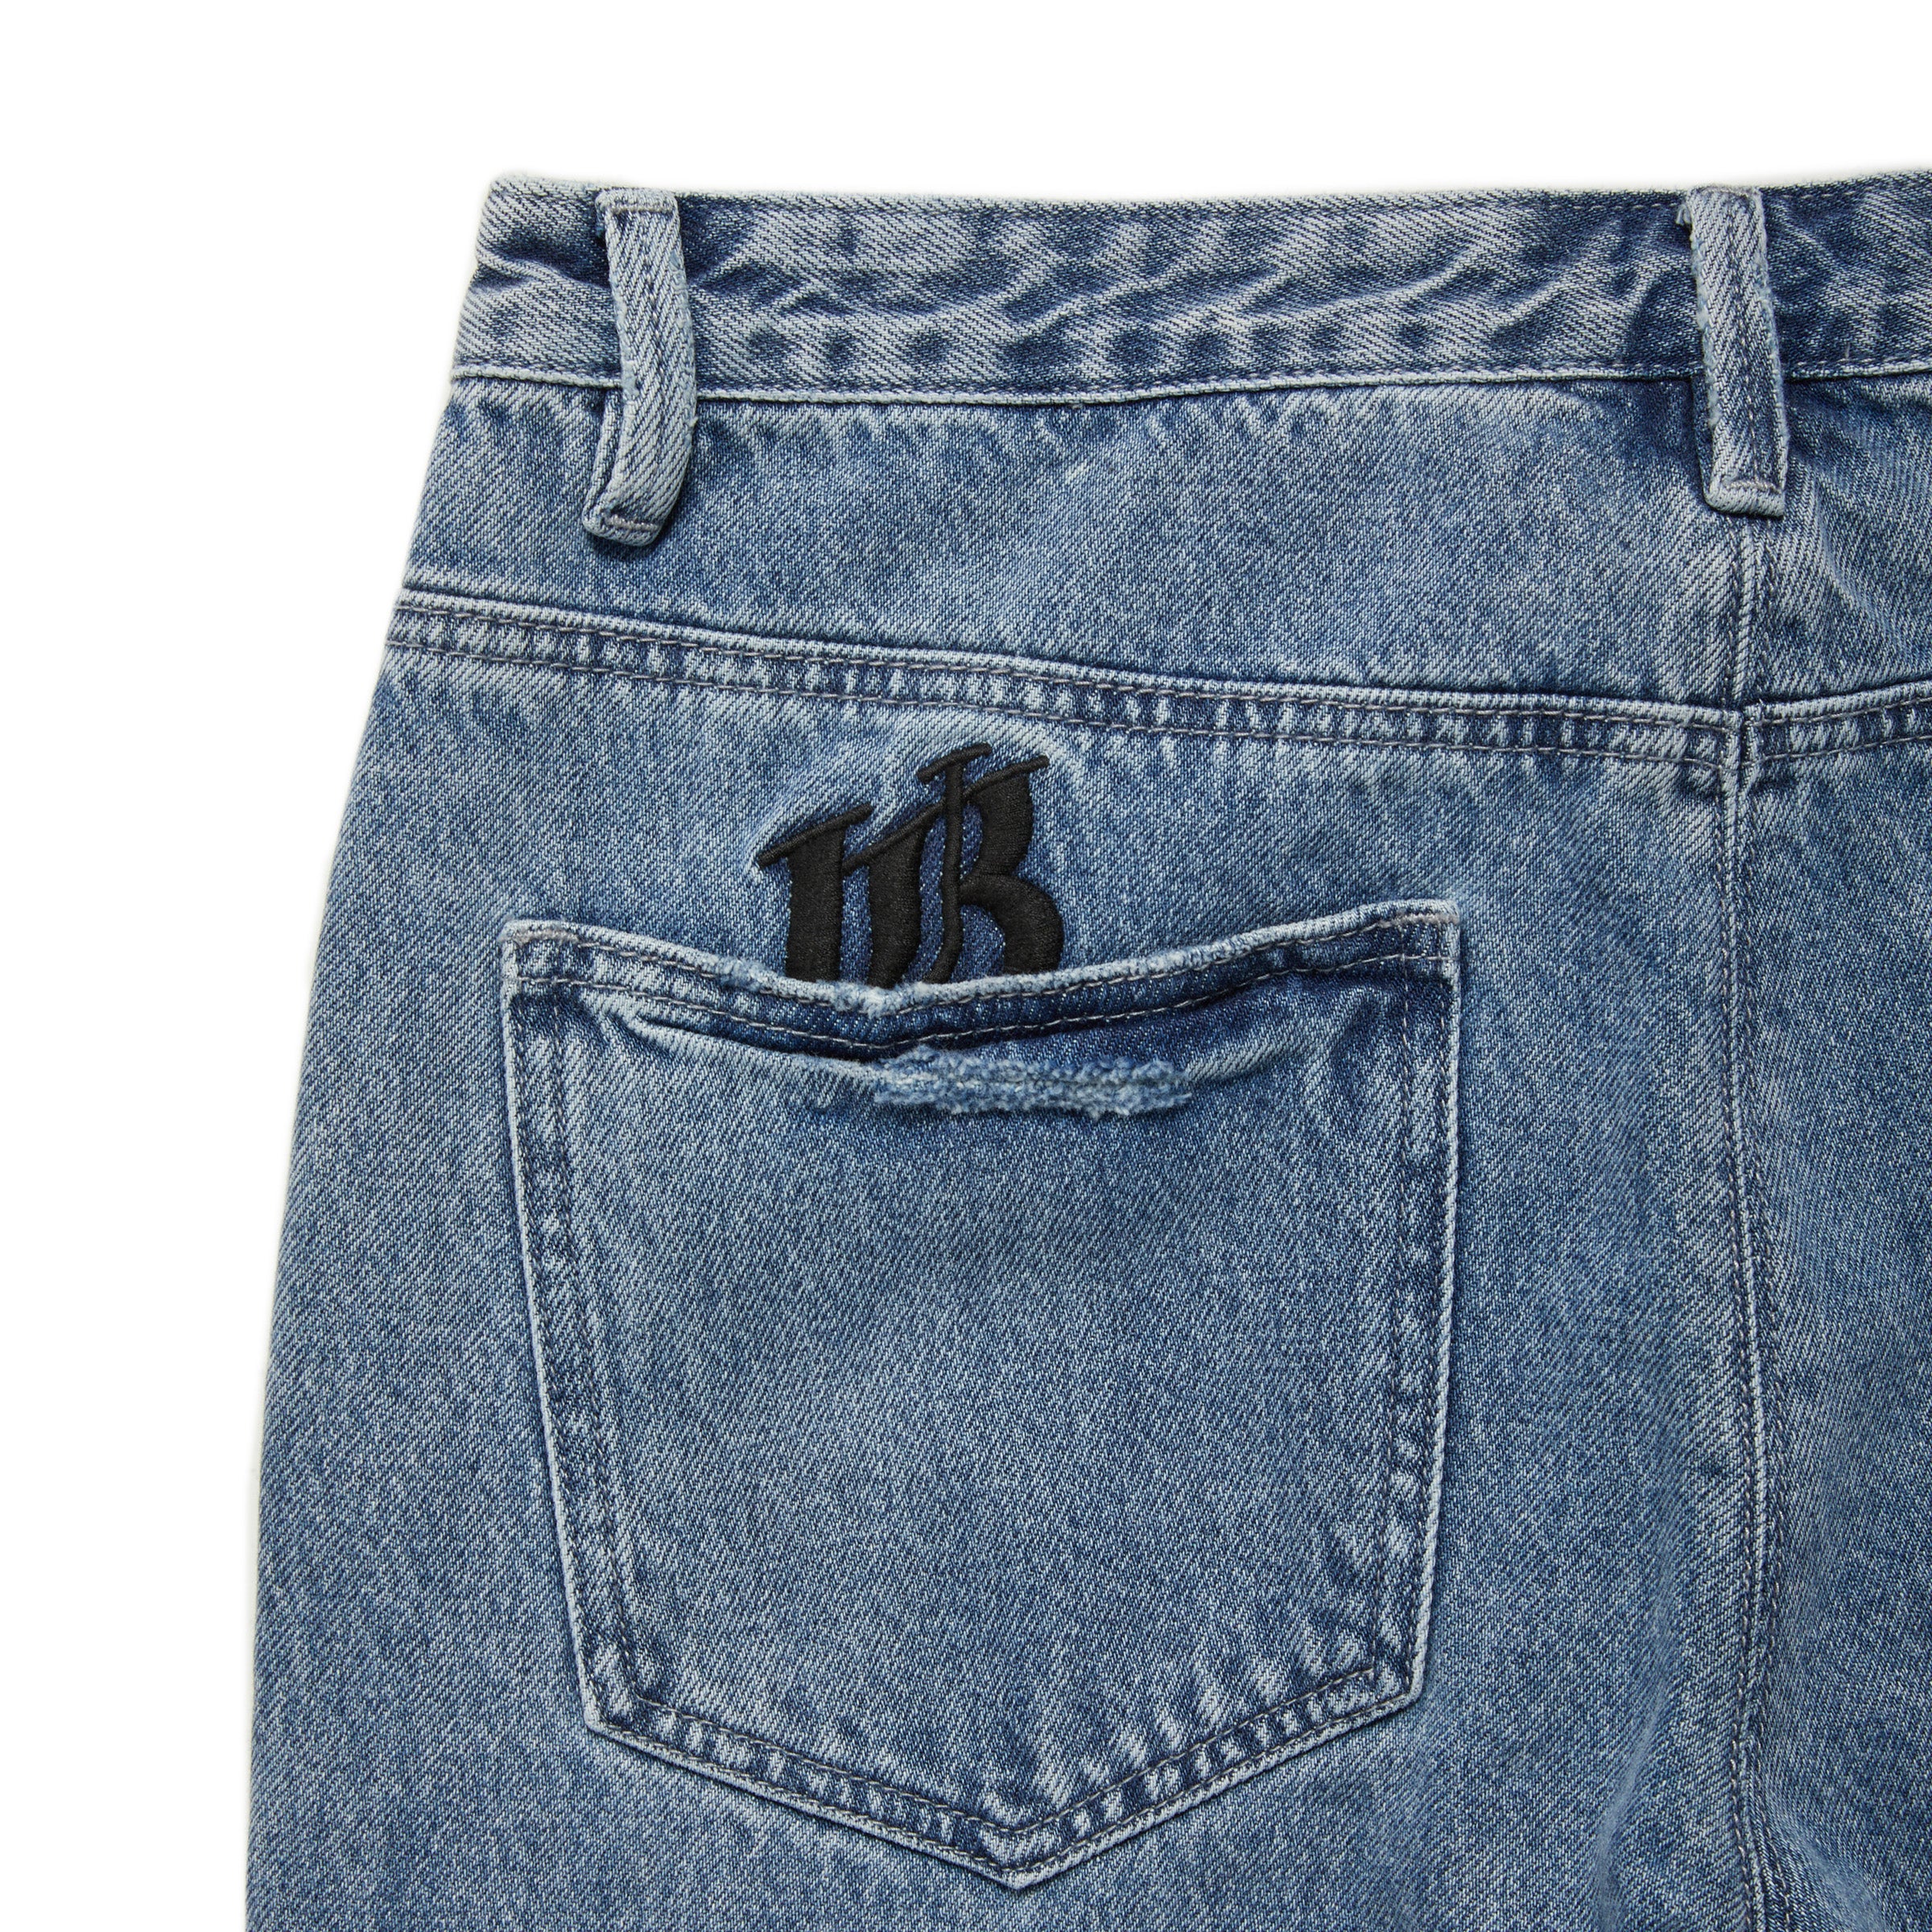 FLARED UB JEANS